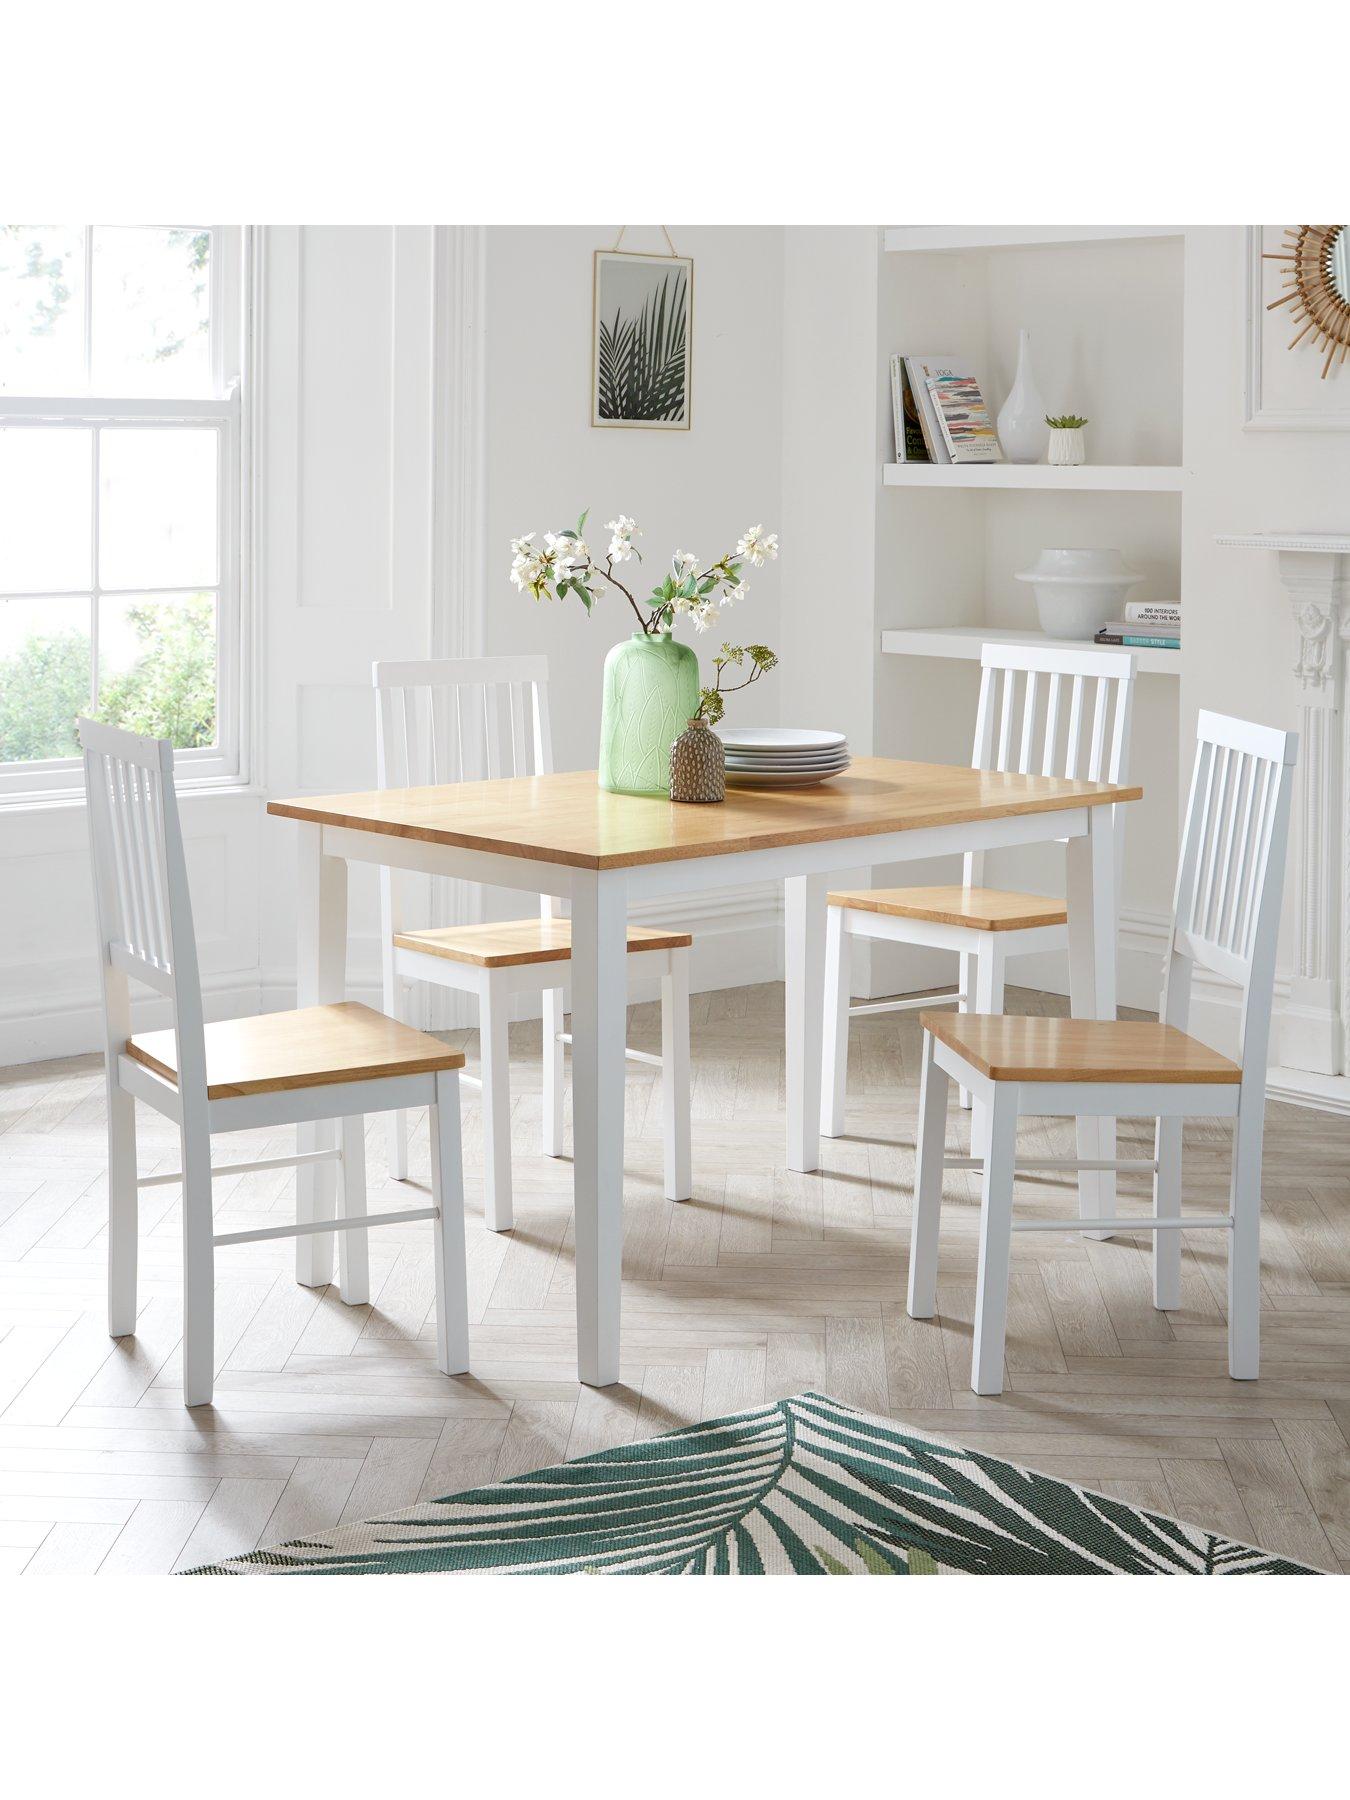 Everyday Michigan 120 Cm Dining Table + 4 Chairs